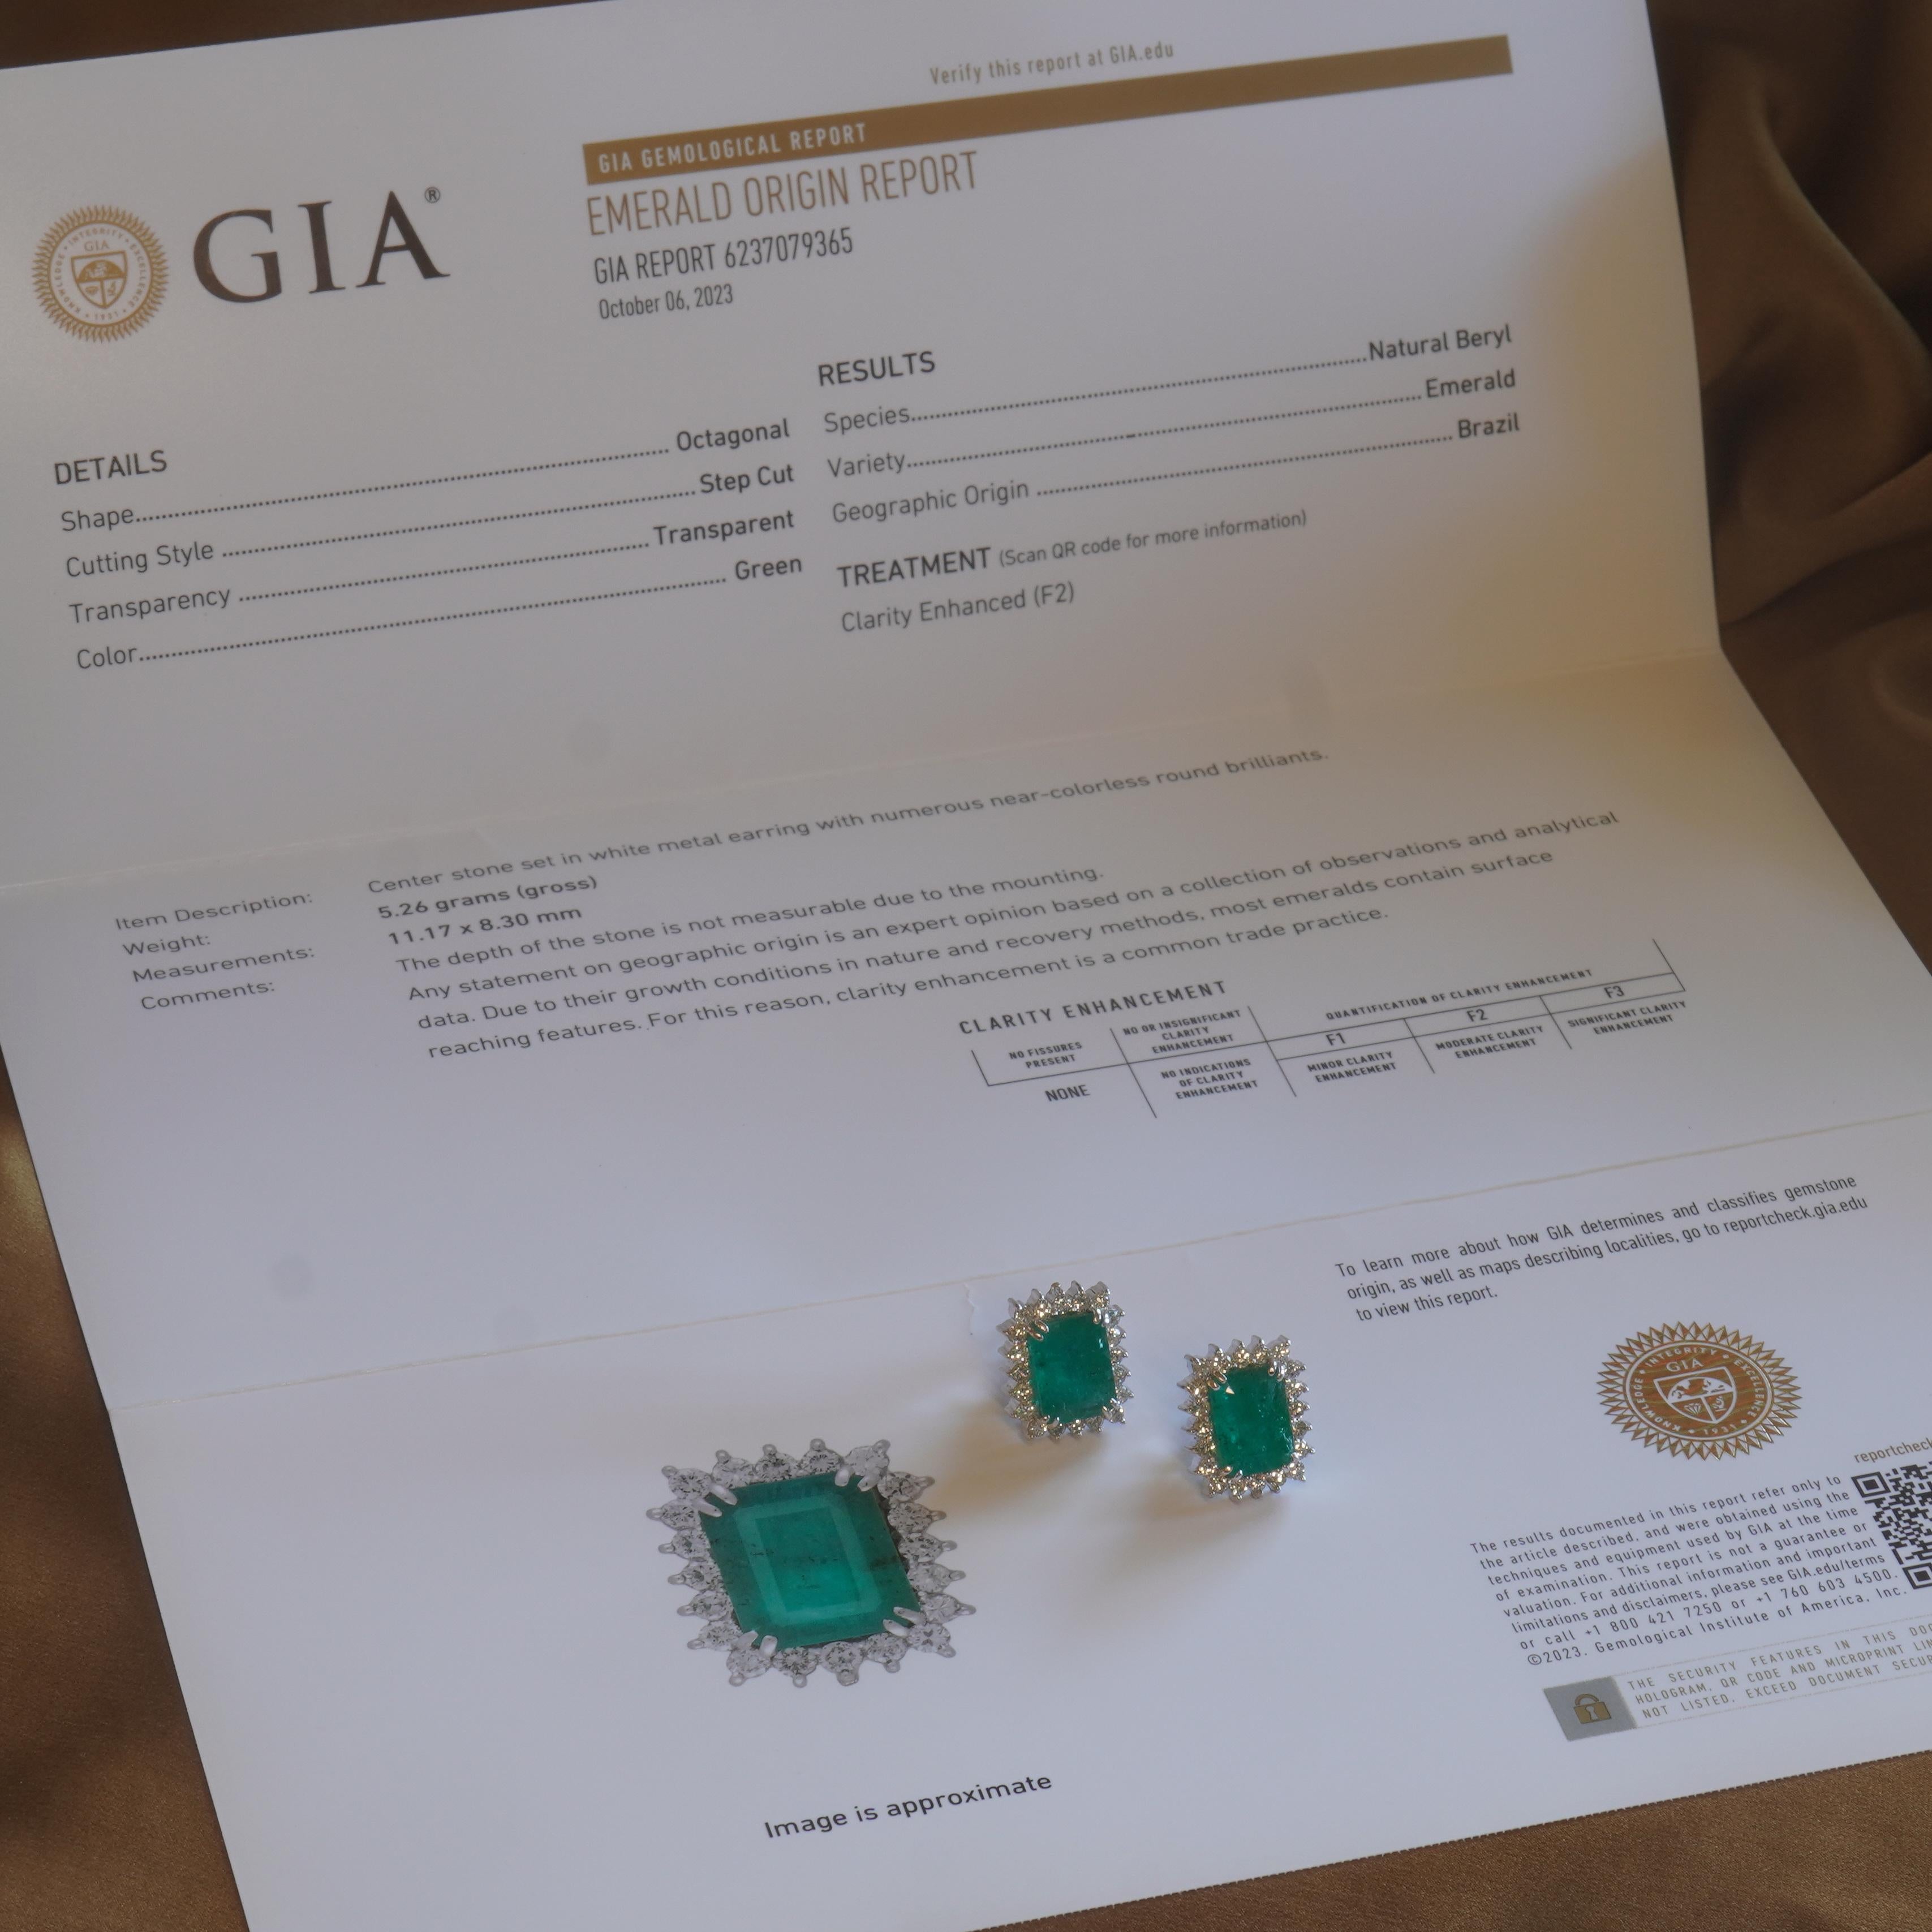 Old South Jewels proudly presents...LUXURY.  VINTAGE GIA CERTIFIED 12.18 CARAT EMERALDS & DIAMOND VINTAGE 18K EARRINGS & BOX!  BRILLIANT GREEN TRANSPARENT 10.56 CARATS NATURAL EMERALDS ARE CROWNED WITH 1.60 CARATS OF SPARKLING WHITE DIAMONDS.  FINE